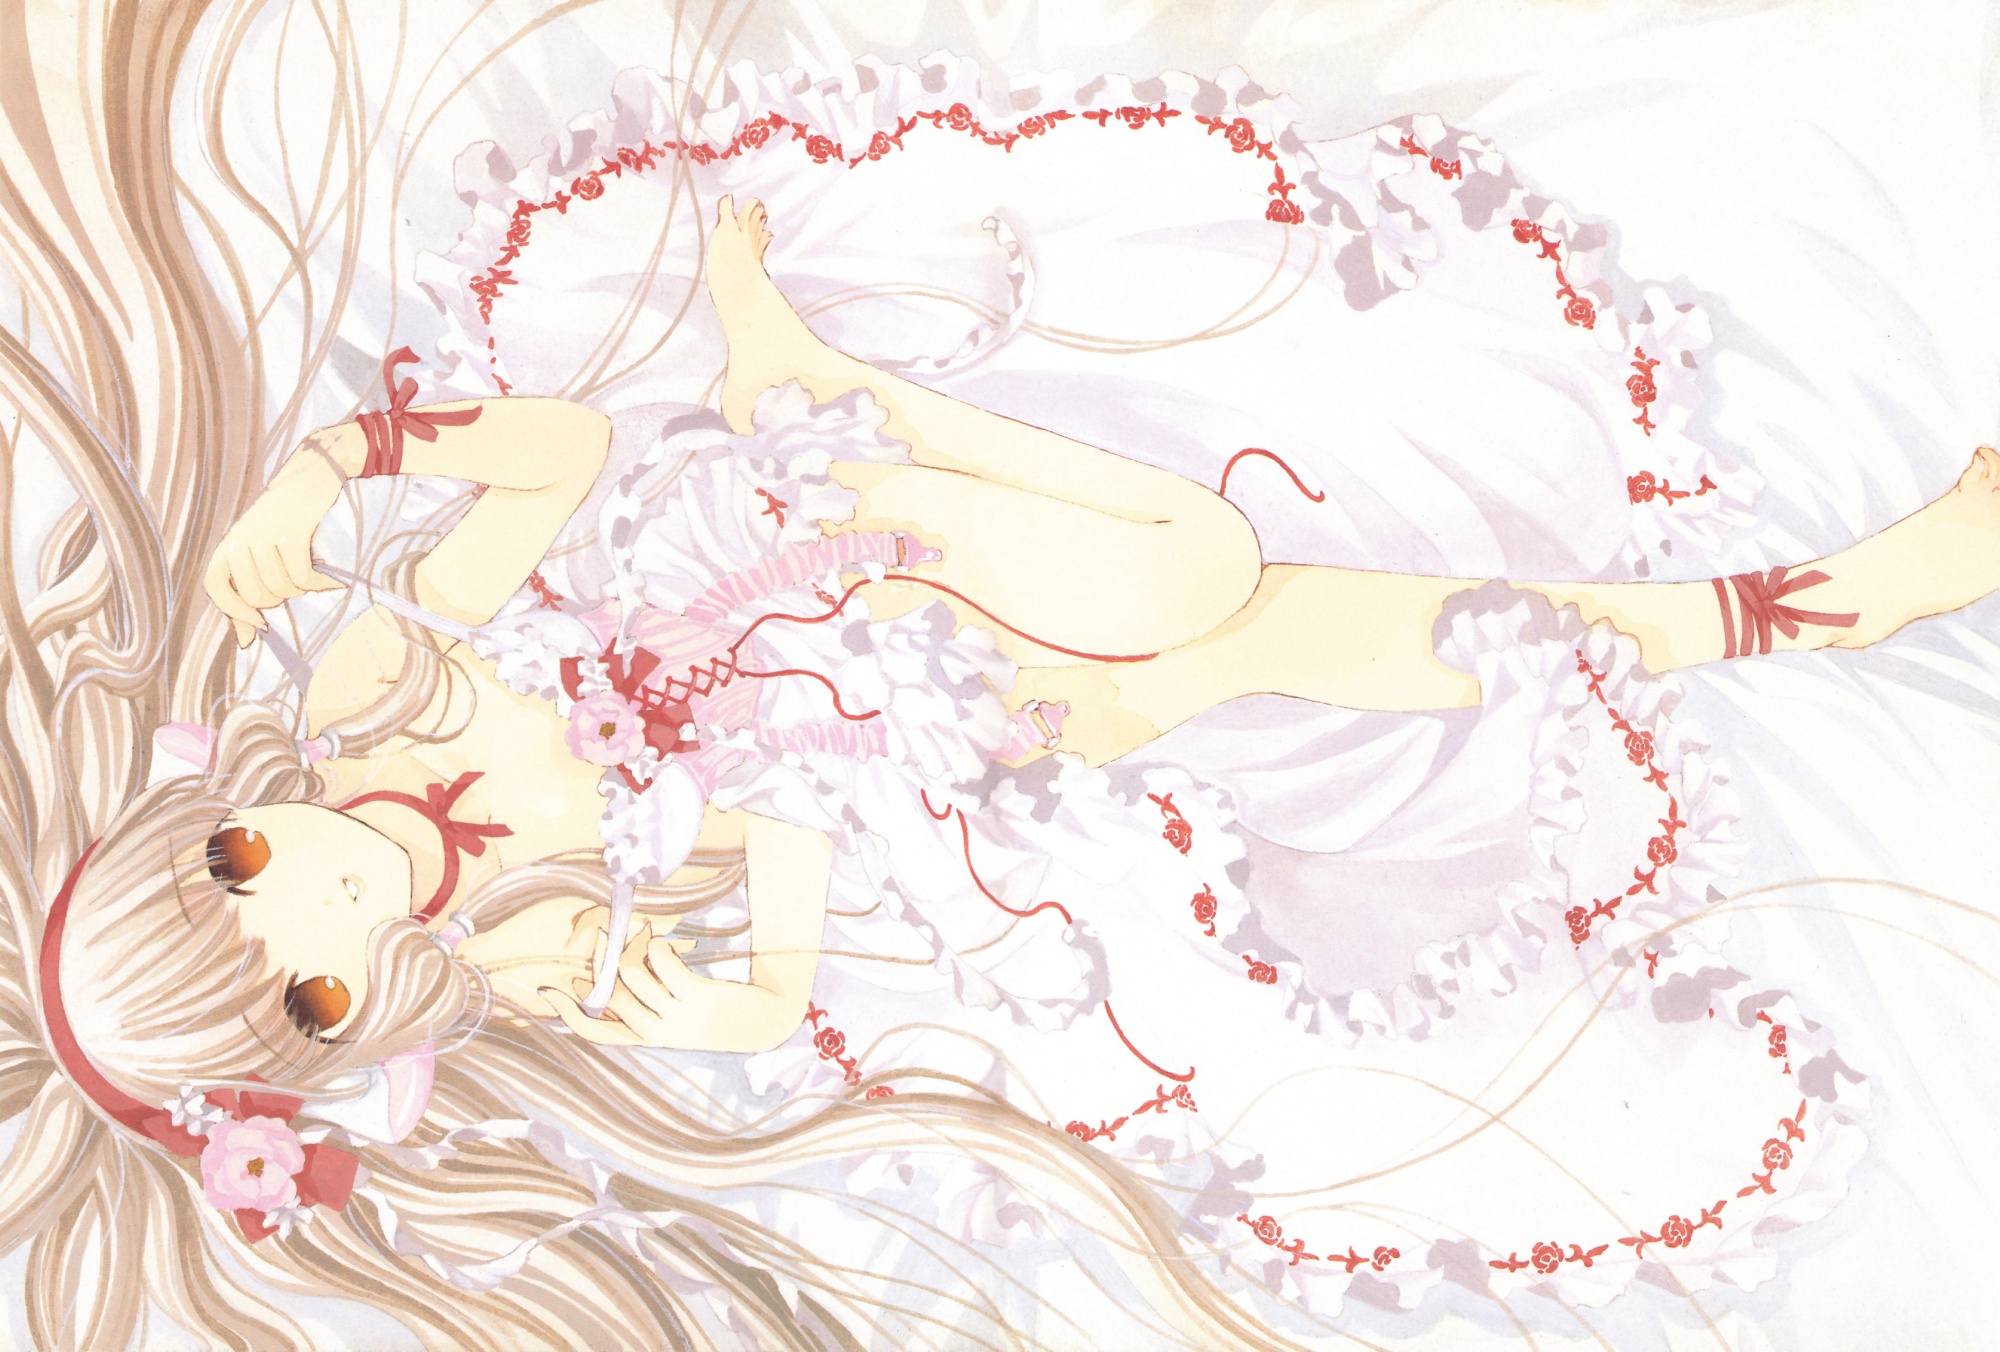 CLAMP Chobits Chii 2000x1352